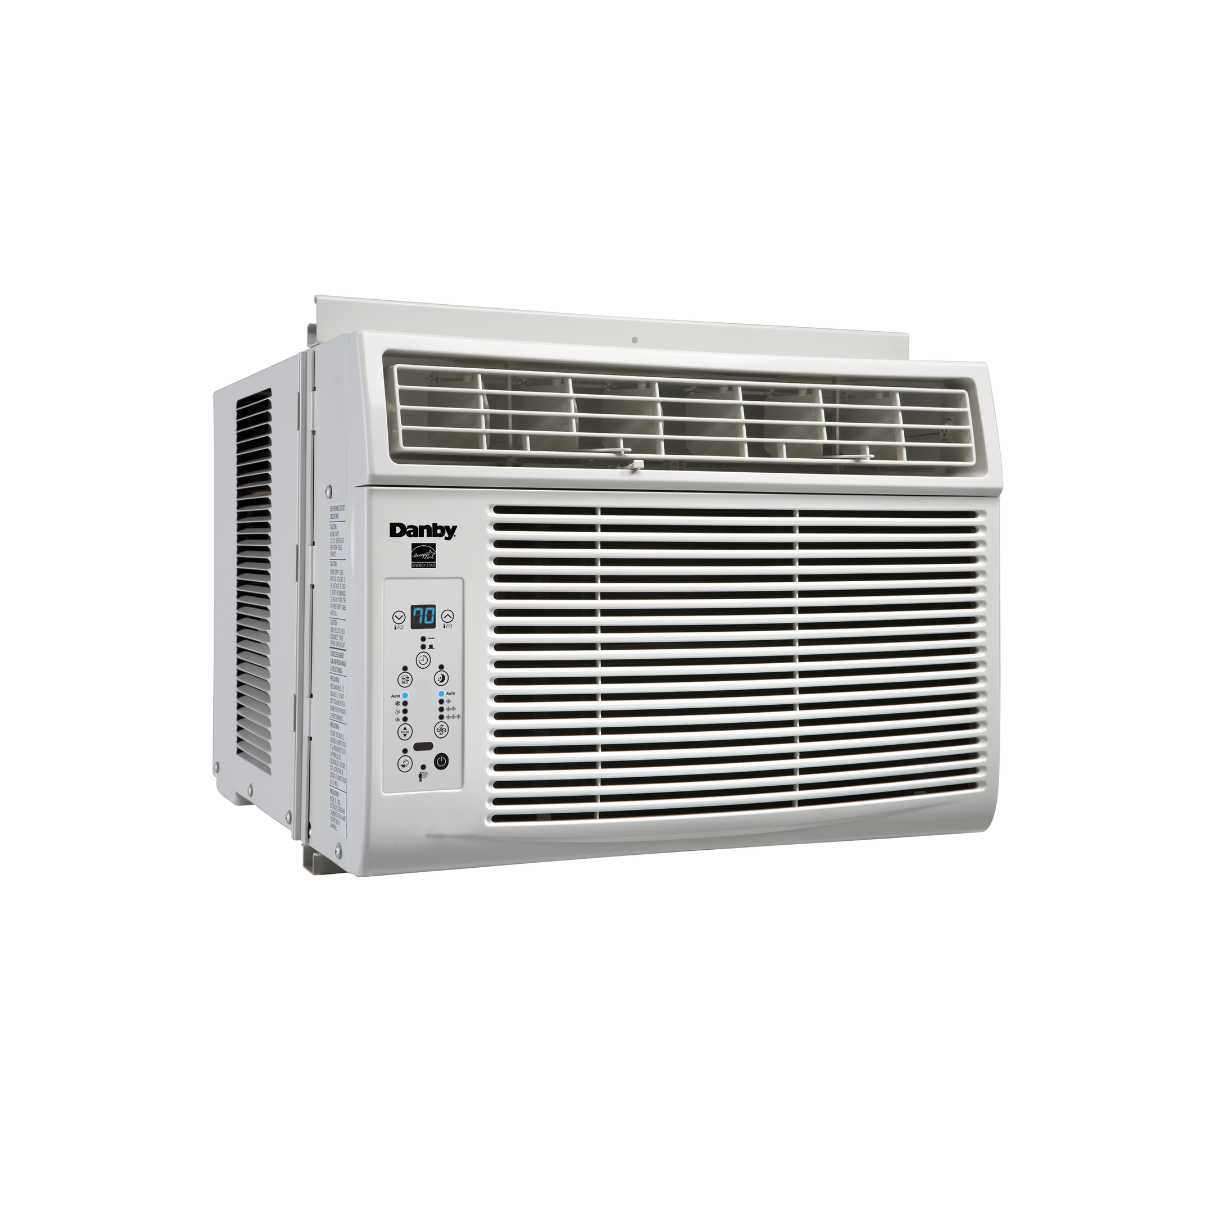 How Many Watts Does A 6,000 Btu Air Conditioner Use